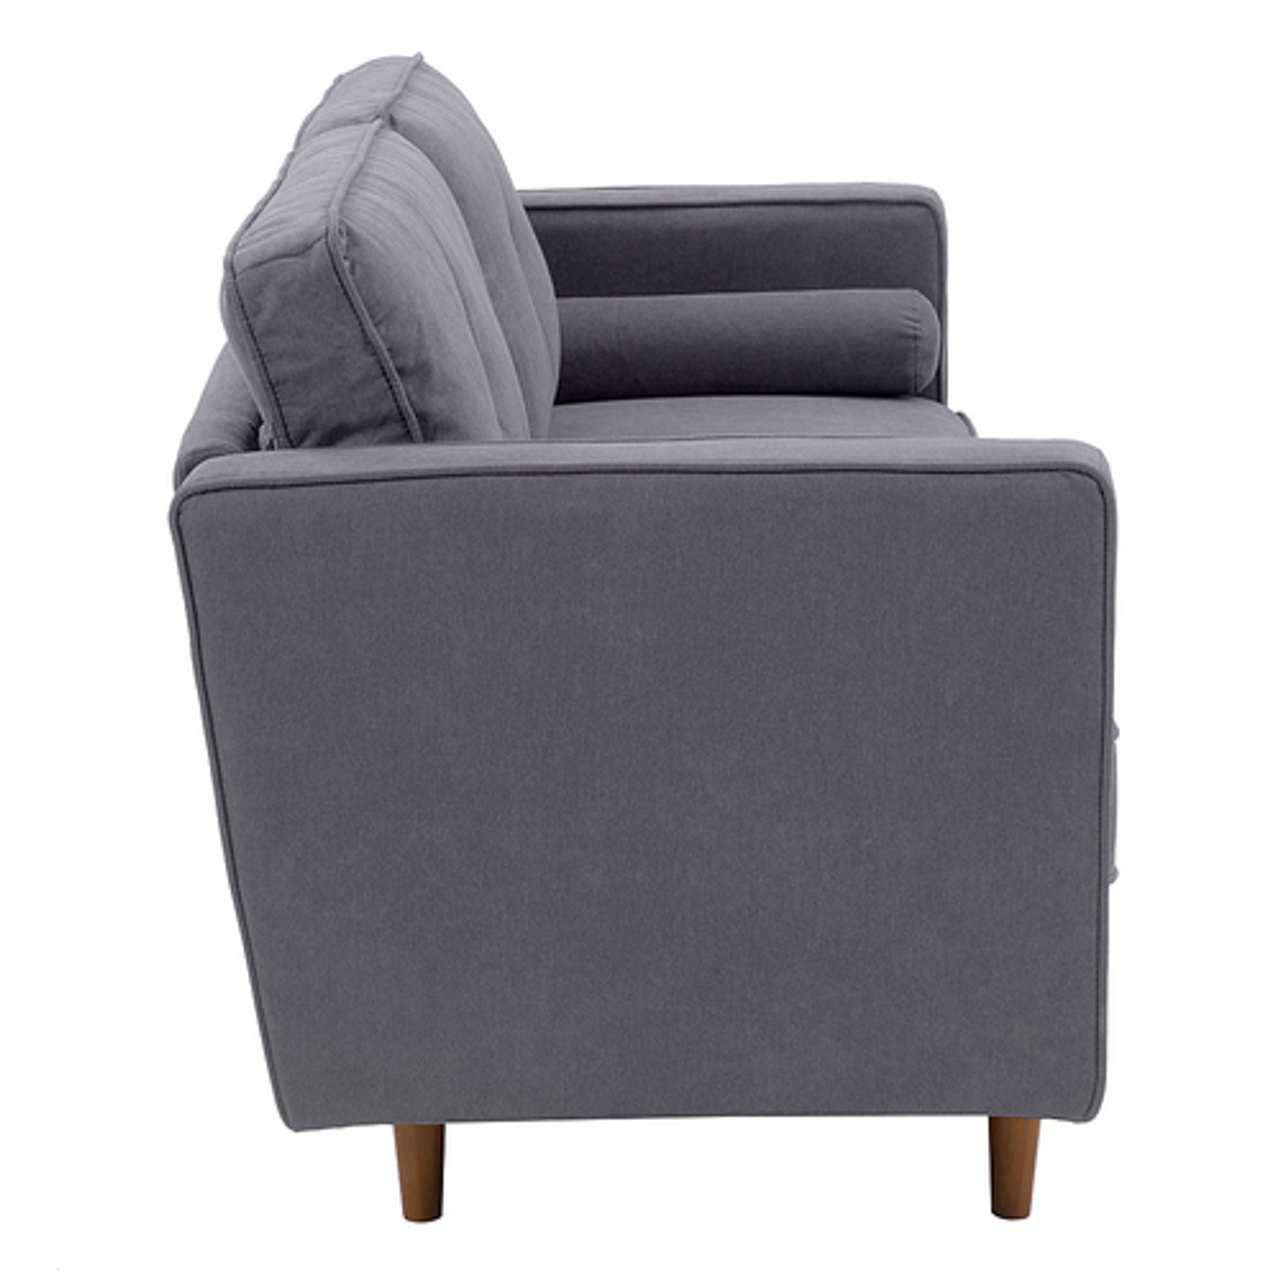 CorLiving Mulberry Fabric Upholstered Modern Sofa - Grey